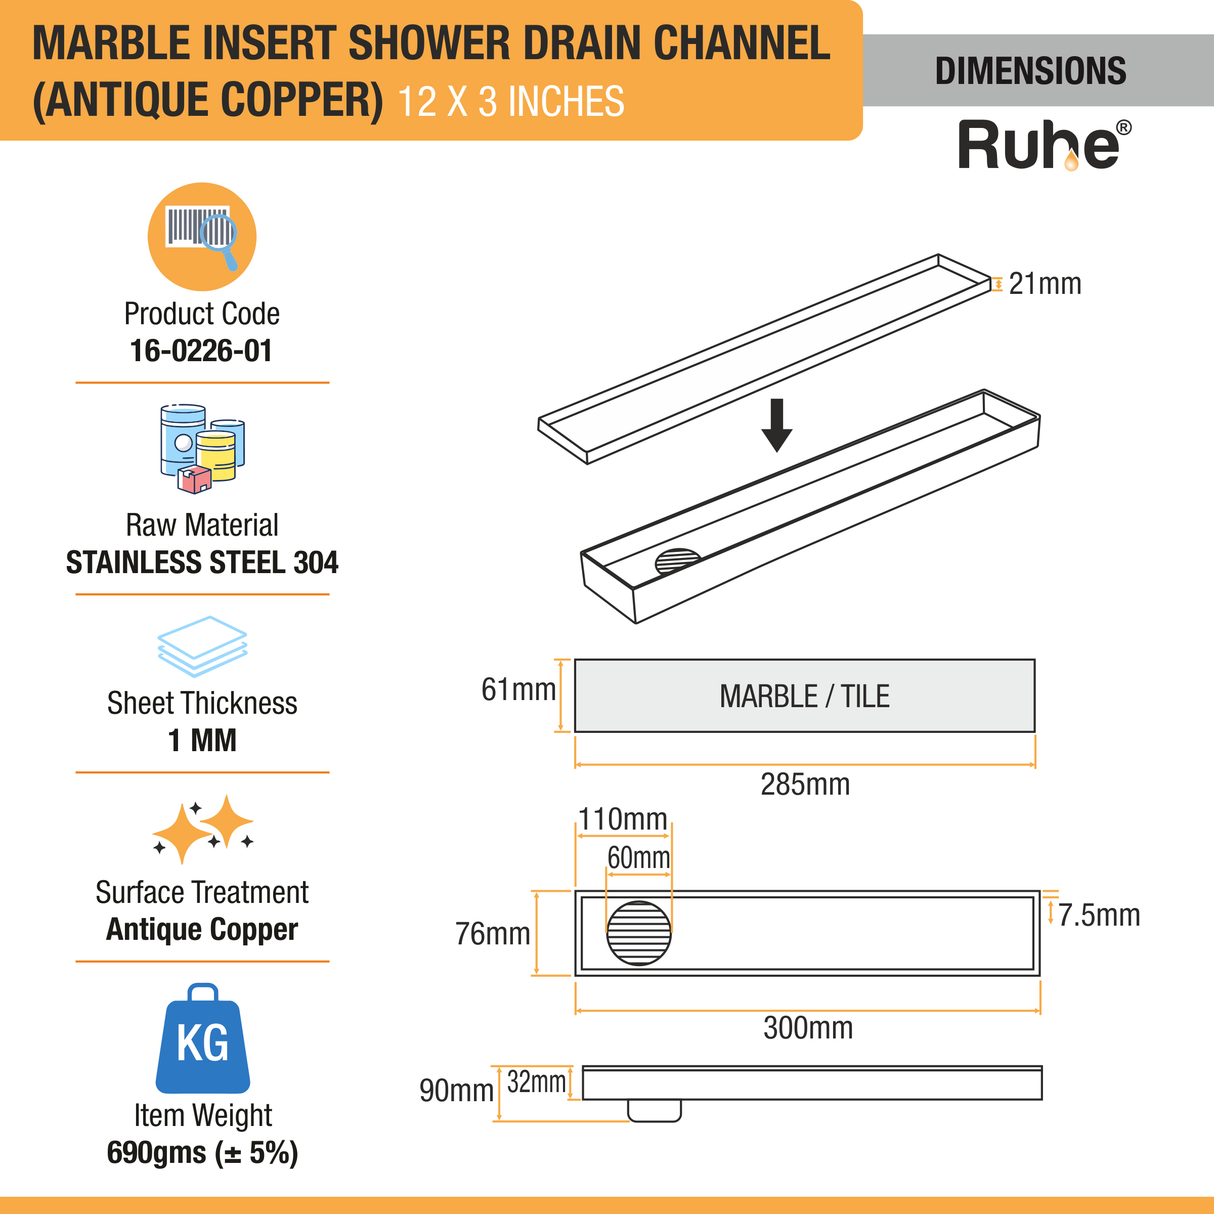 Marble Insert Shower Drain Channel (12 x 3 Inches) ROSE GOLD PVD Coated dimensions and sizes